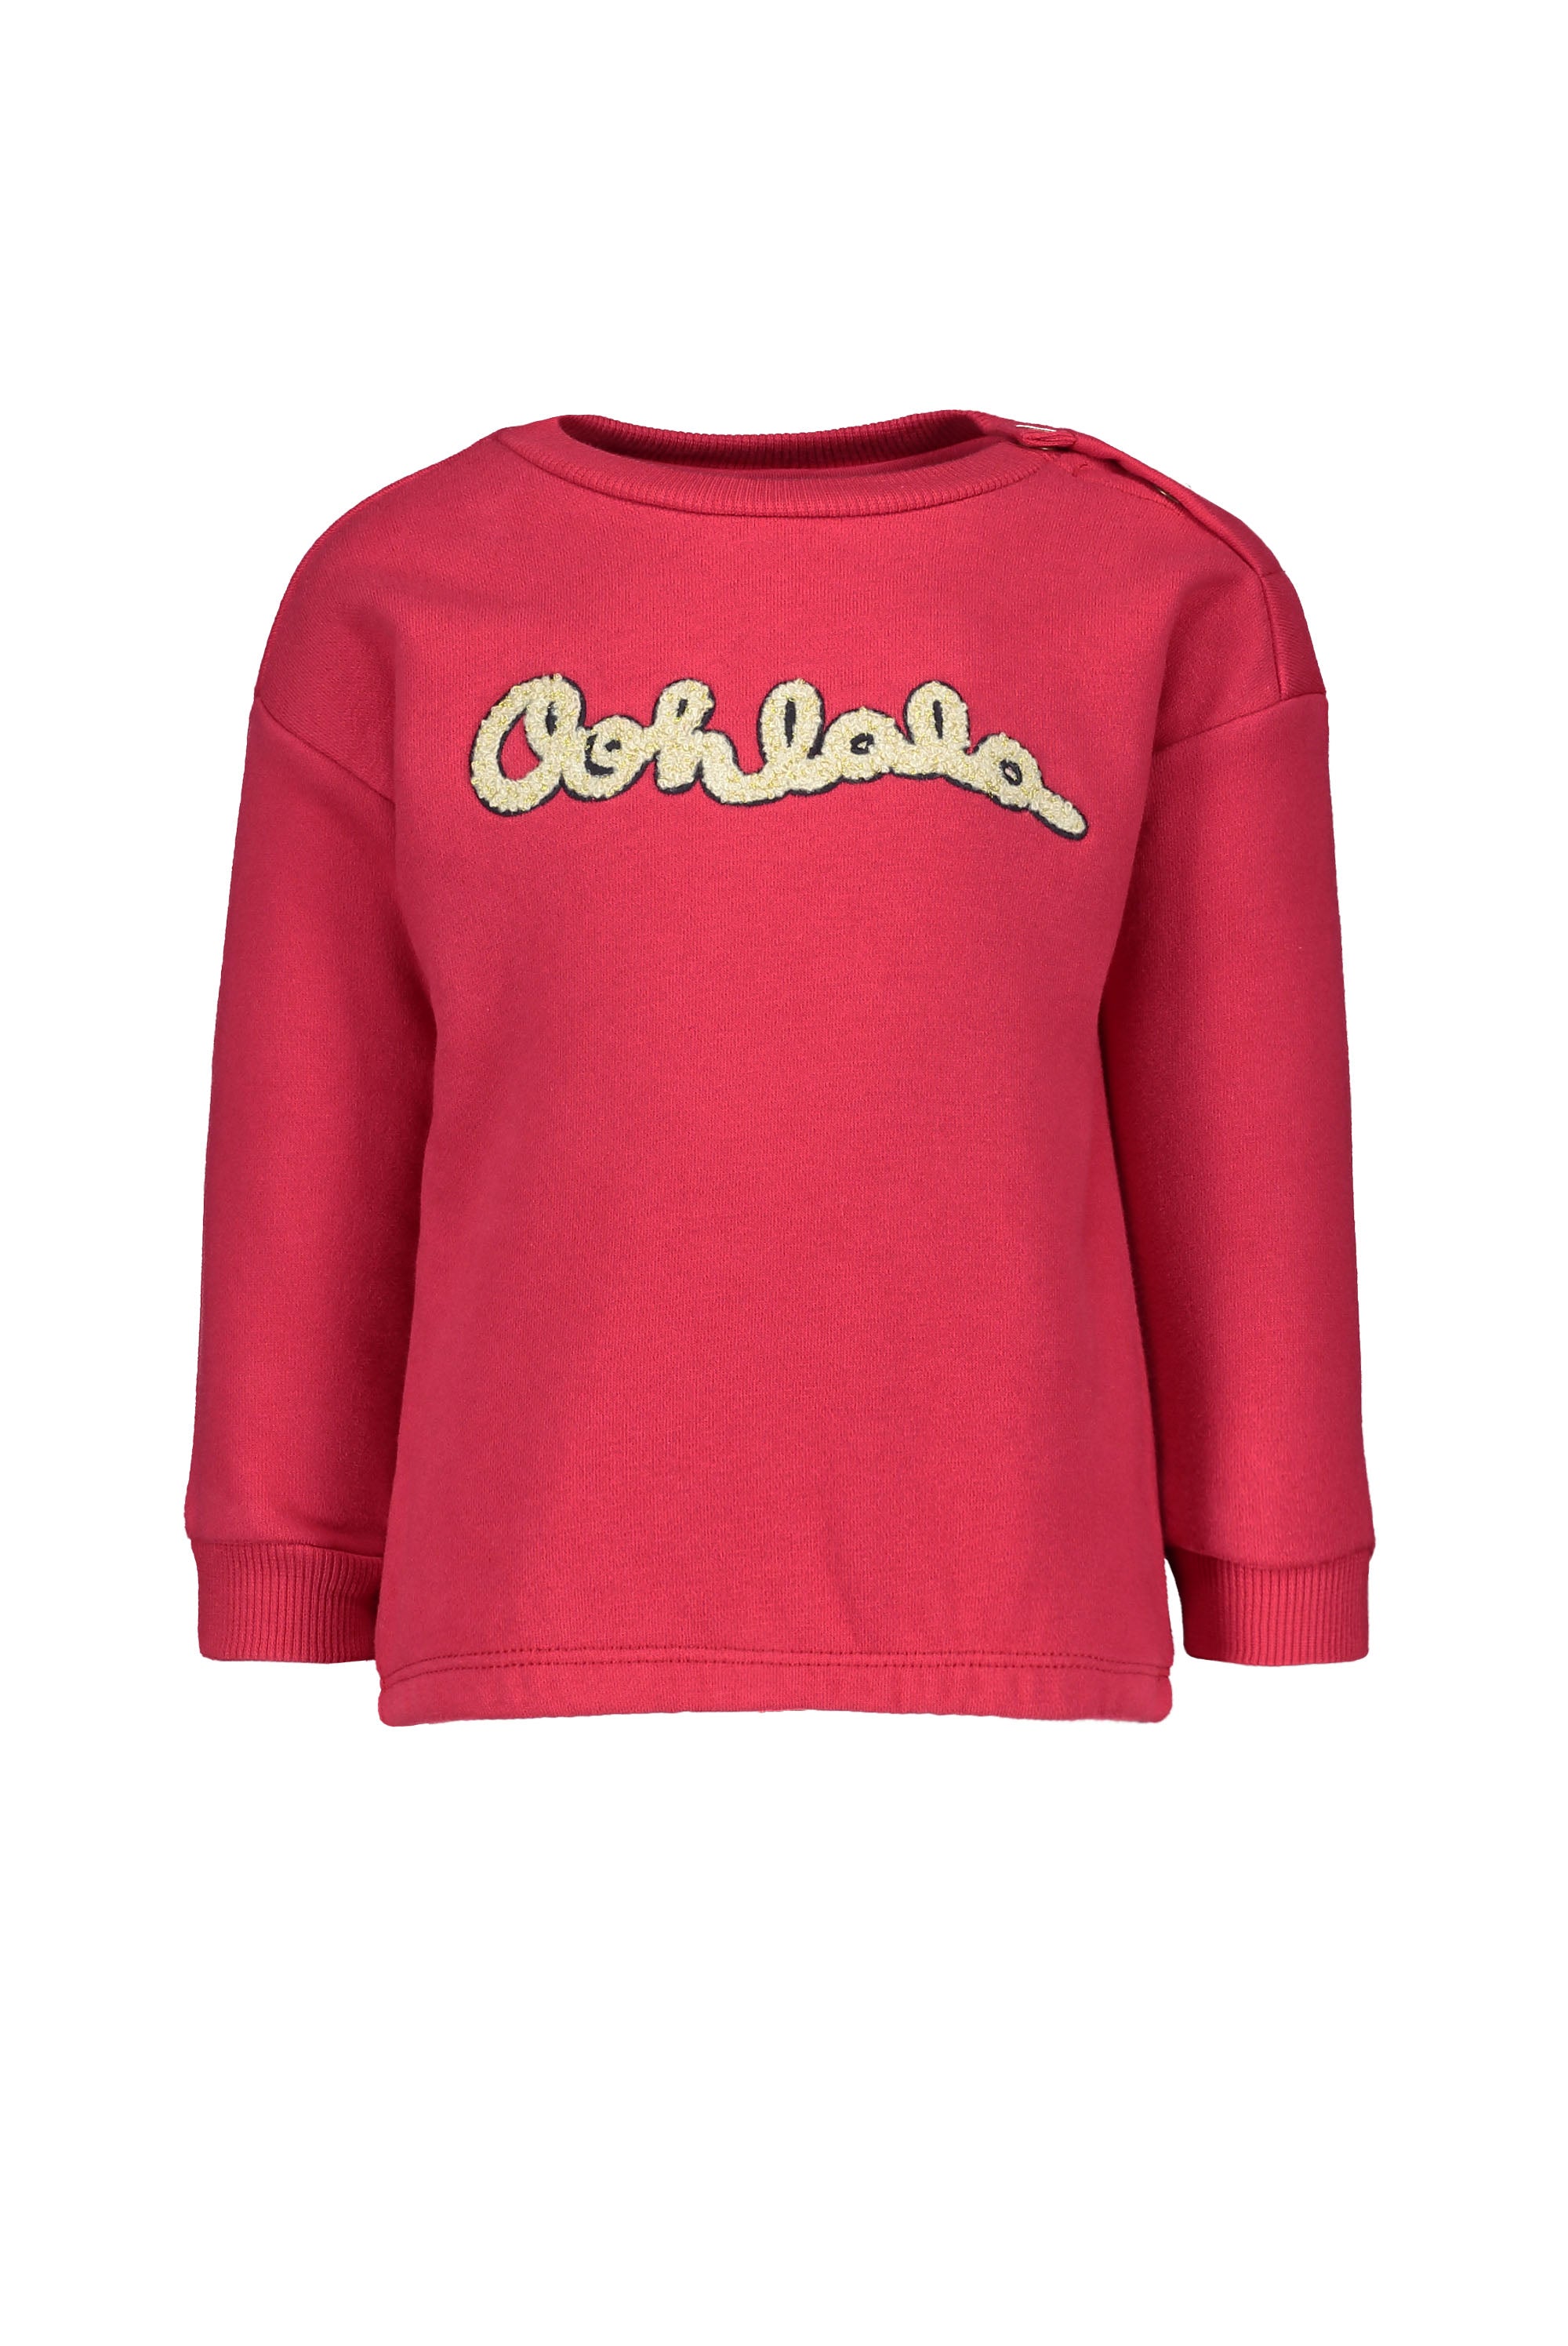 Flo Flo baby girls sweater divers